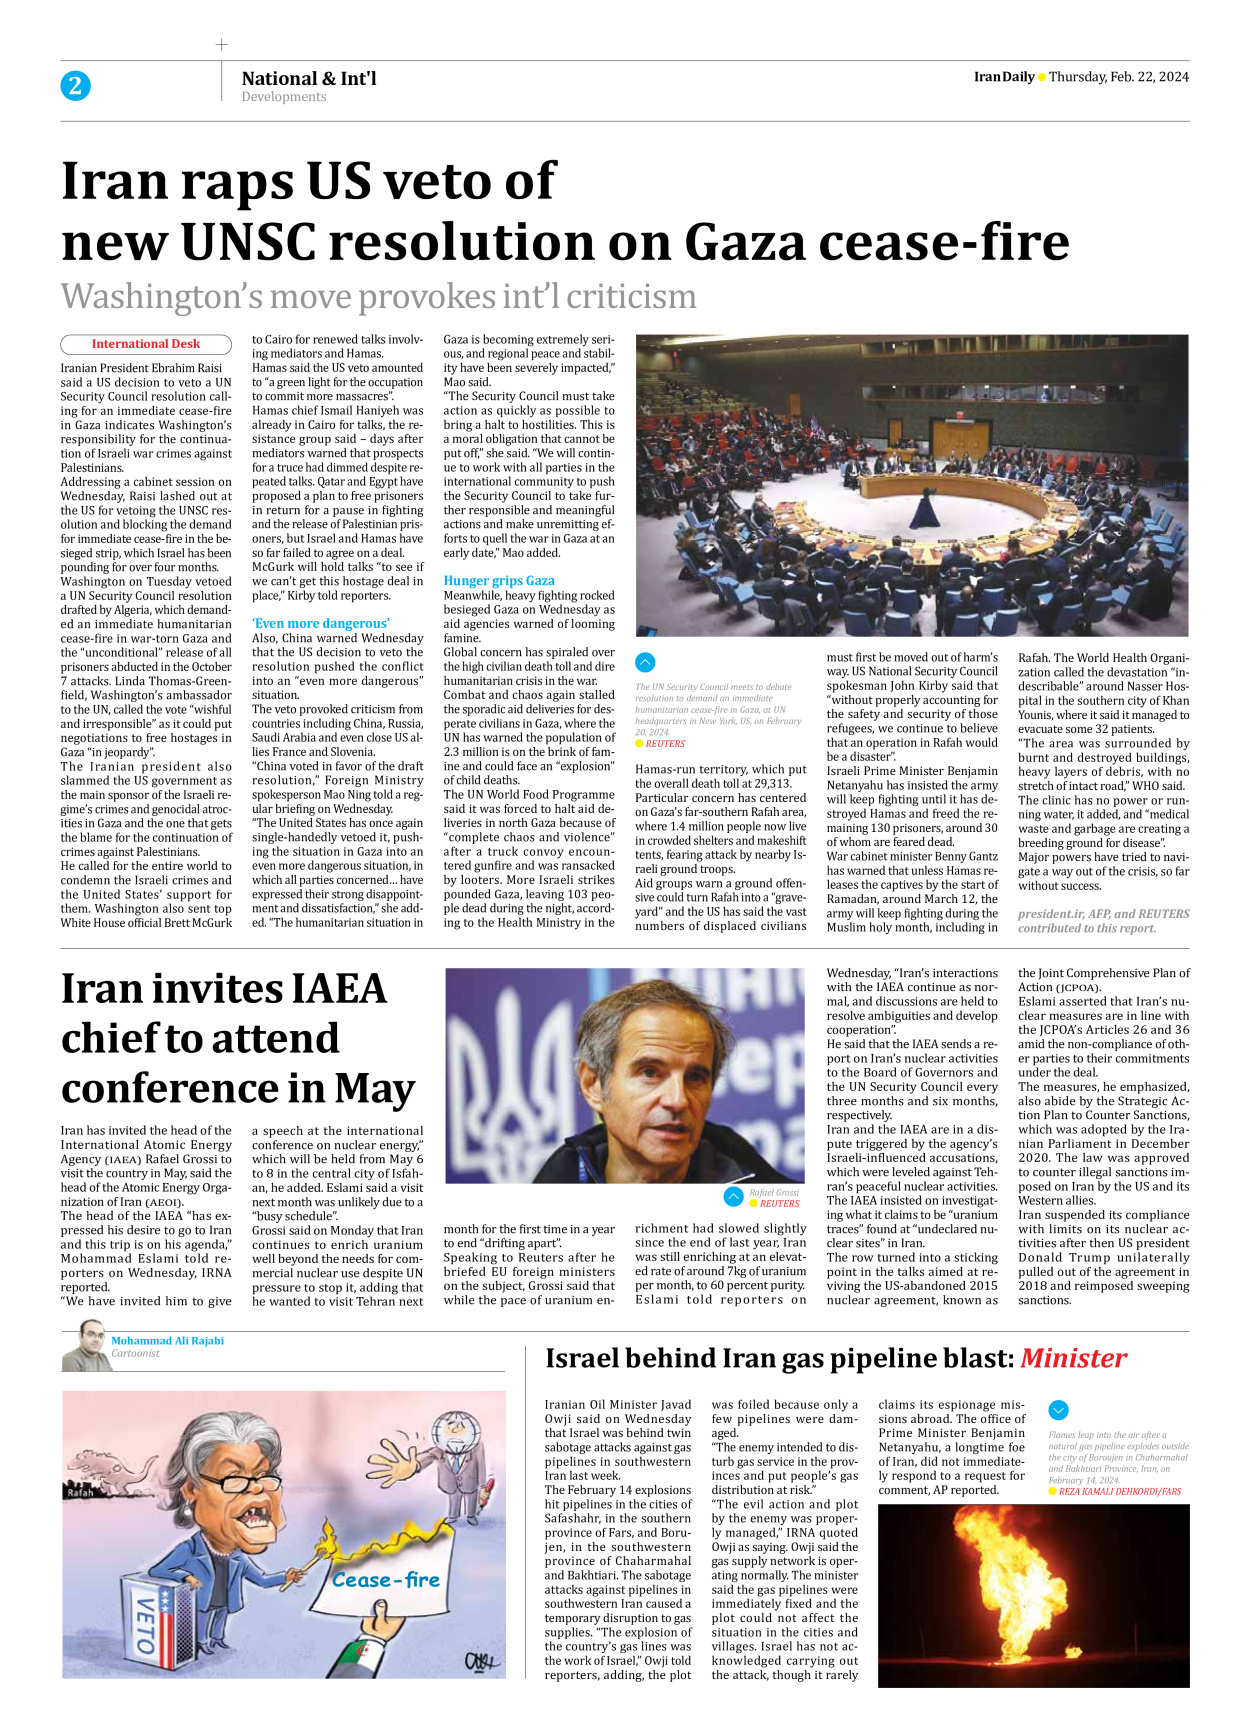 Iran Daily - Number Seven Thousand Five Hundred and Fourteen - 22 February 2024 - Page 2